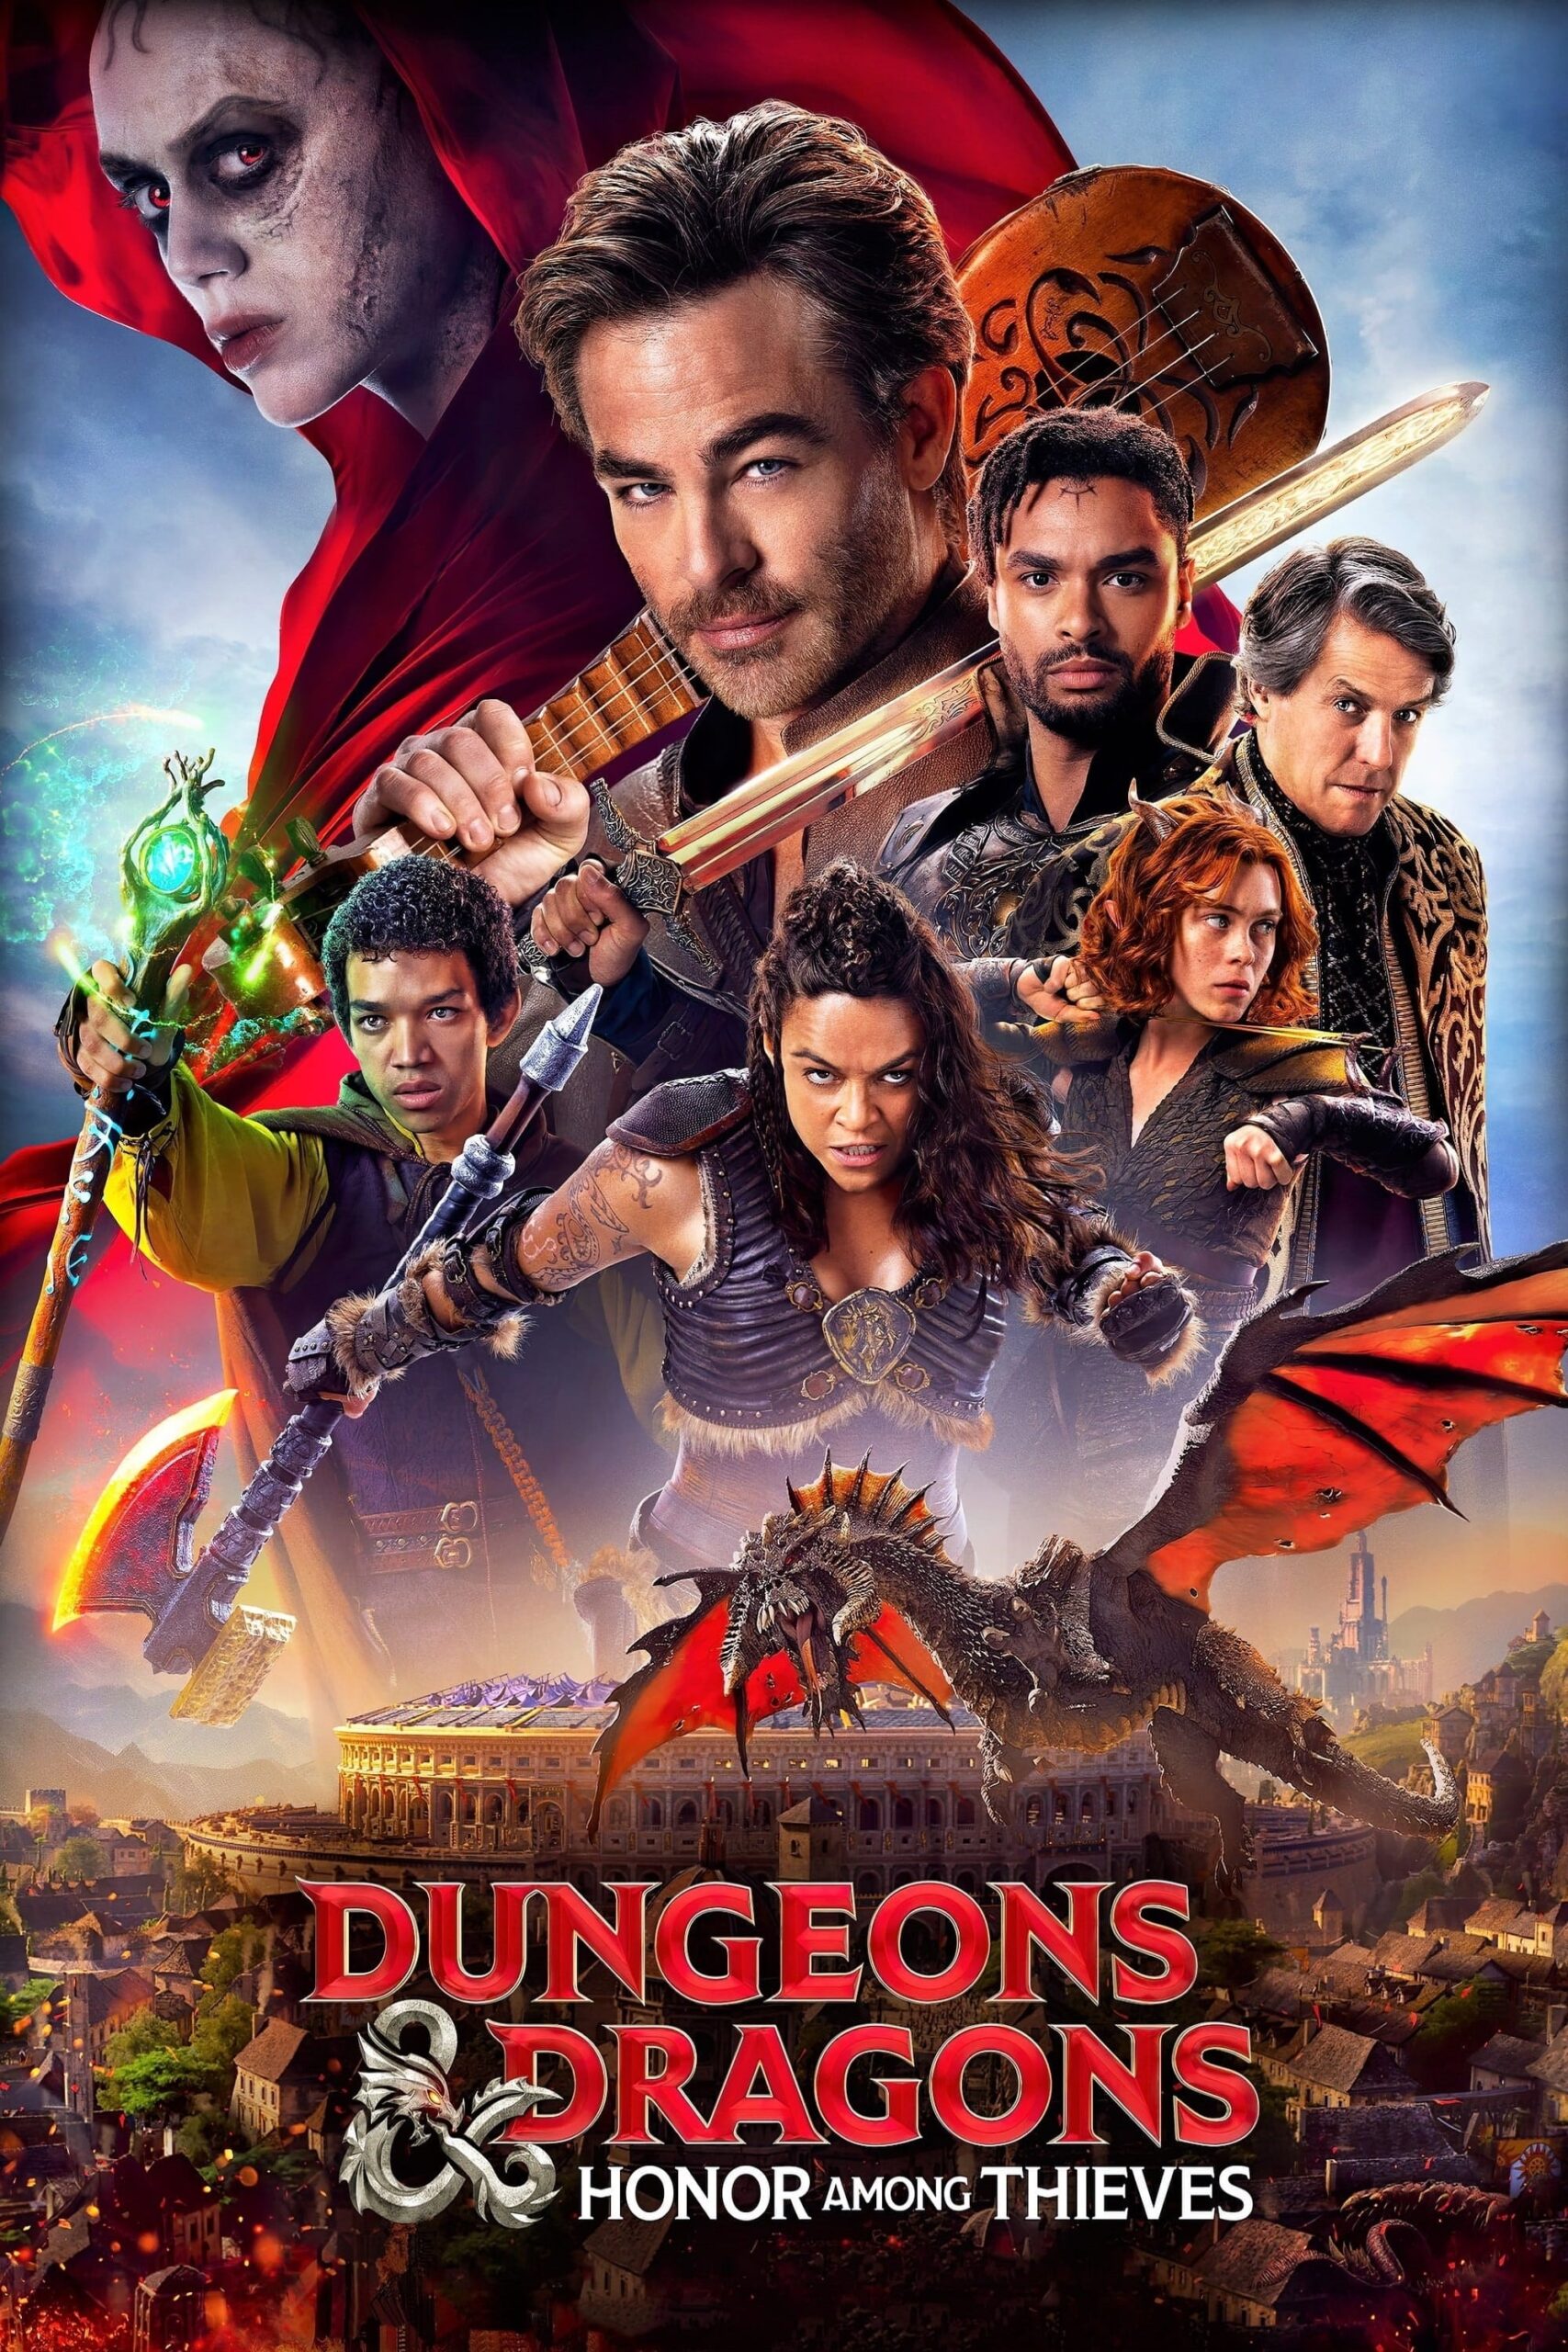 Poster for the movie "Dungeons & Dragons: Honor Among Thieves"